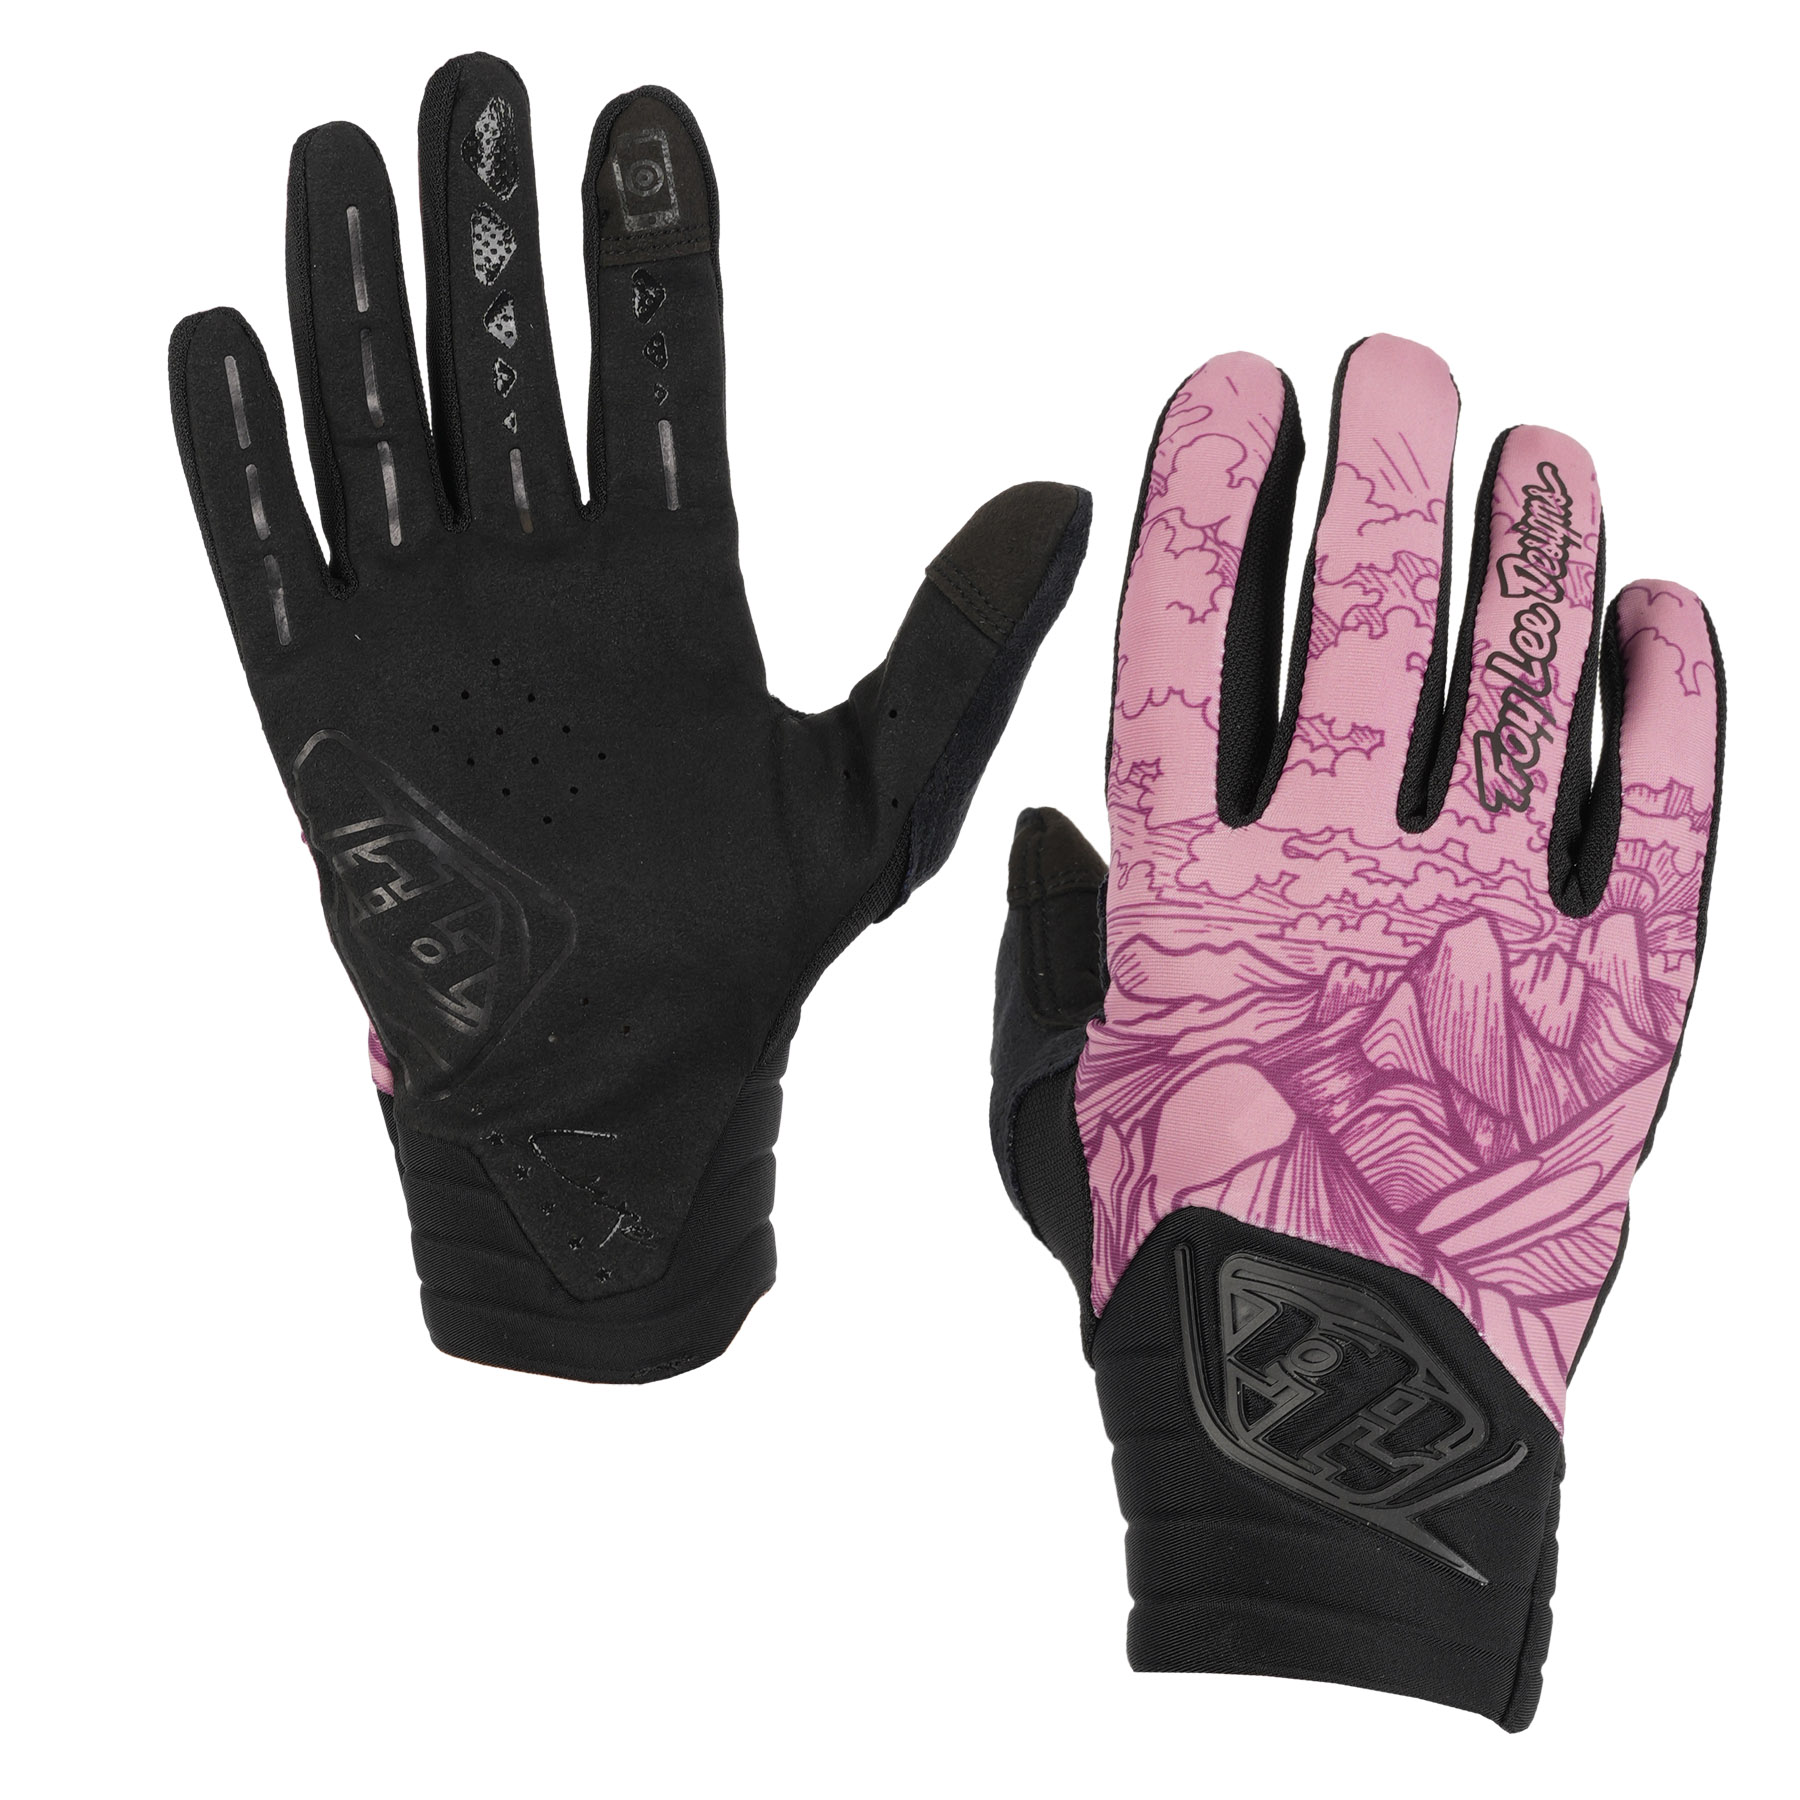 Picture of Troy Lee Designs Luxe Gloves Women - Micayla Gatto Rosewood